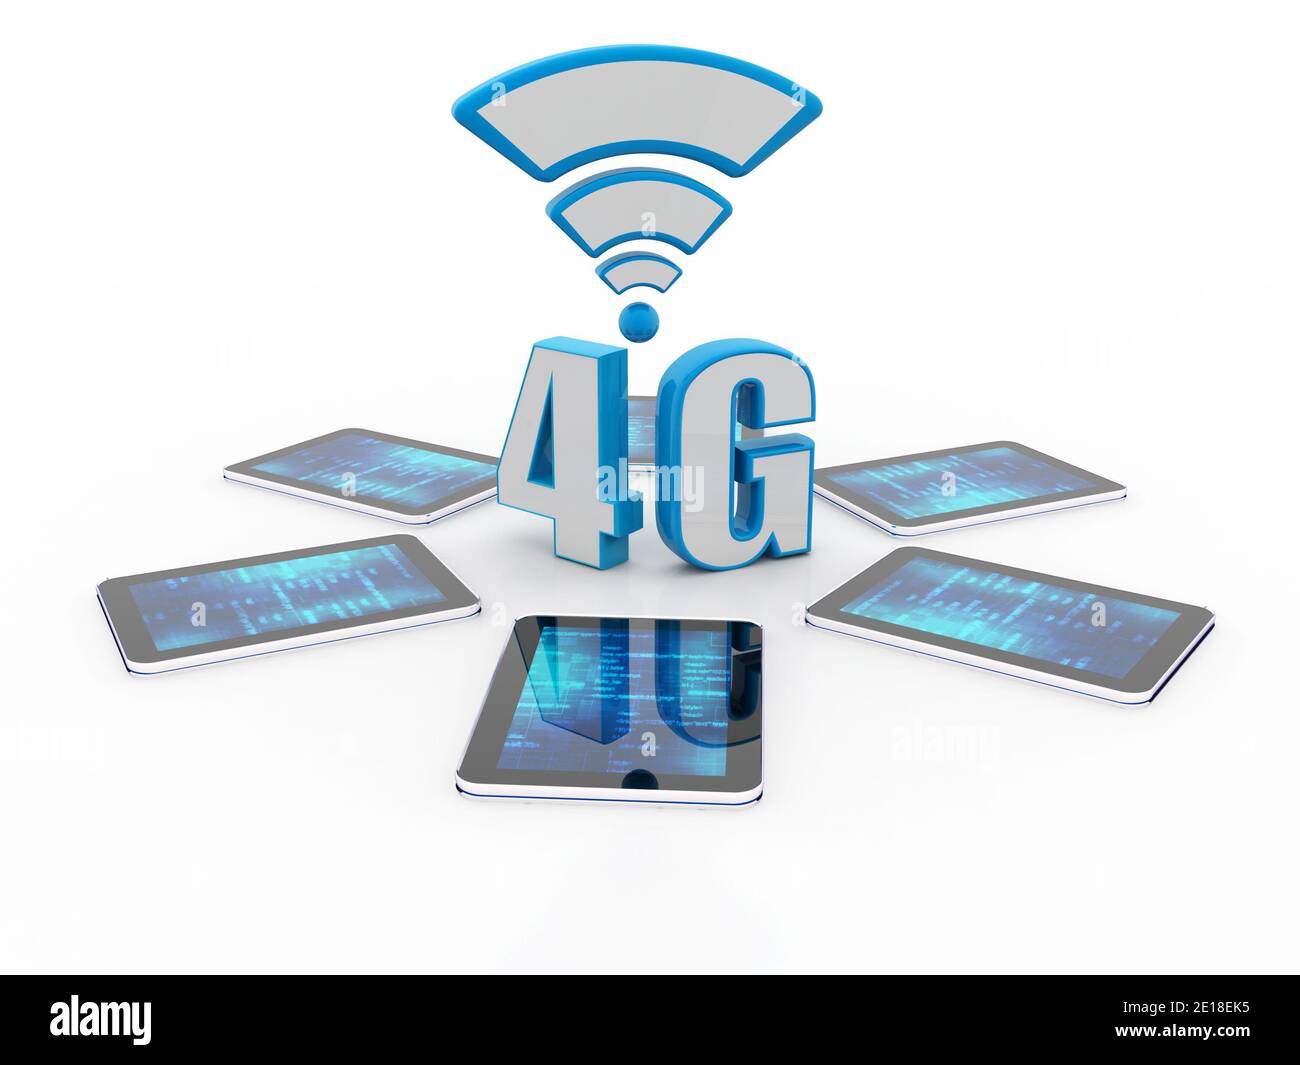 4G LTE wireless communication technology, Mobile telecommunication cellular high speed data connection business concept, isolated on white background. Stock Photo